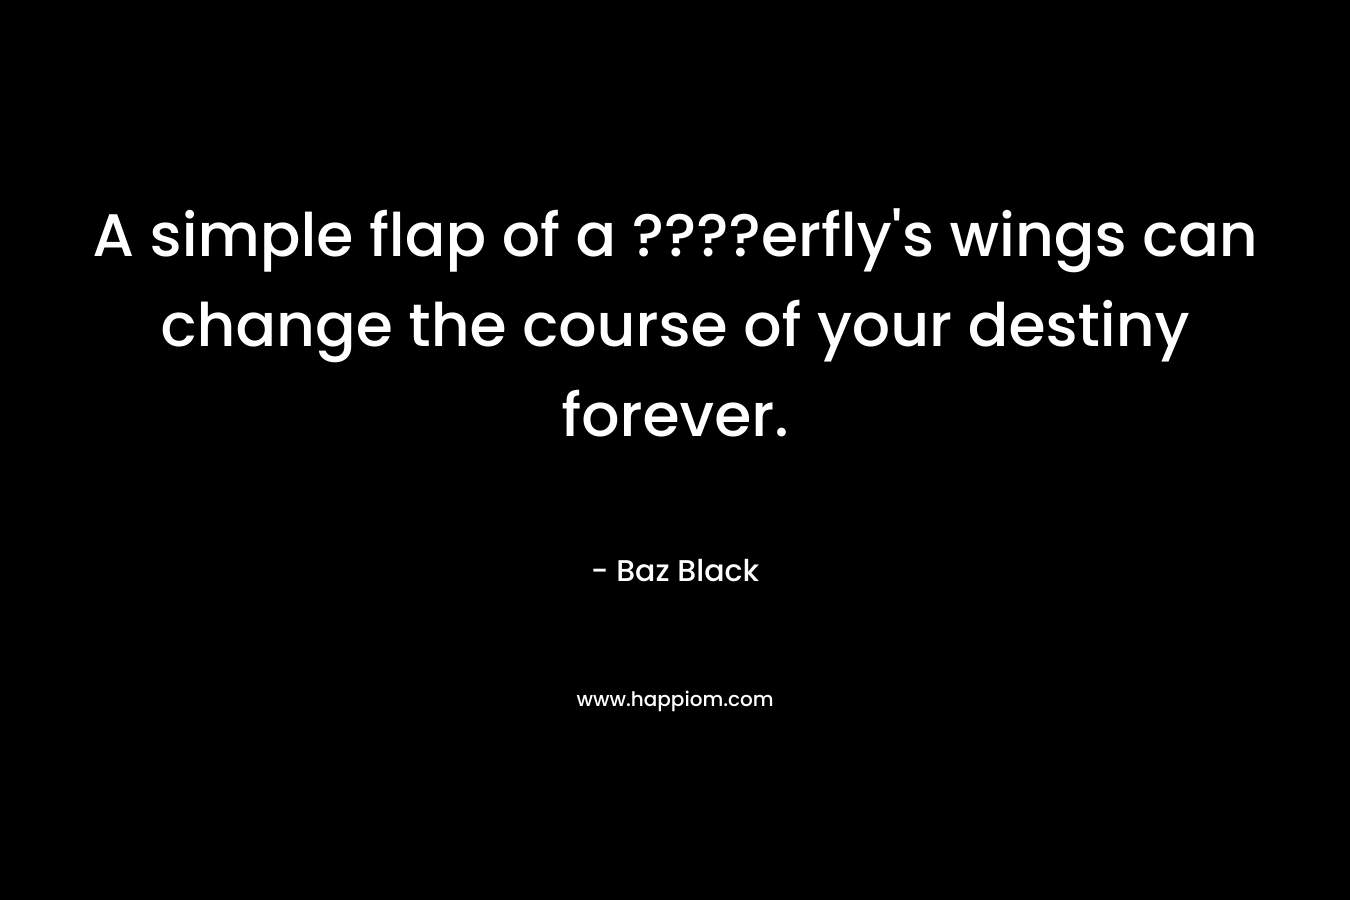 A simple flap of a ????erfly's wings can change the course of your destiny forever.